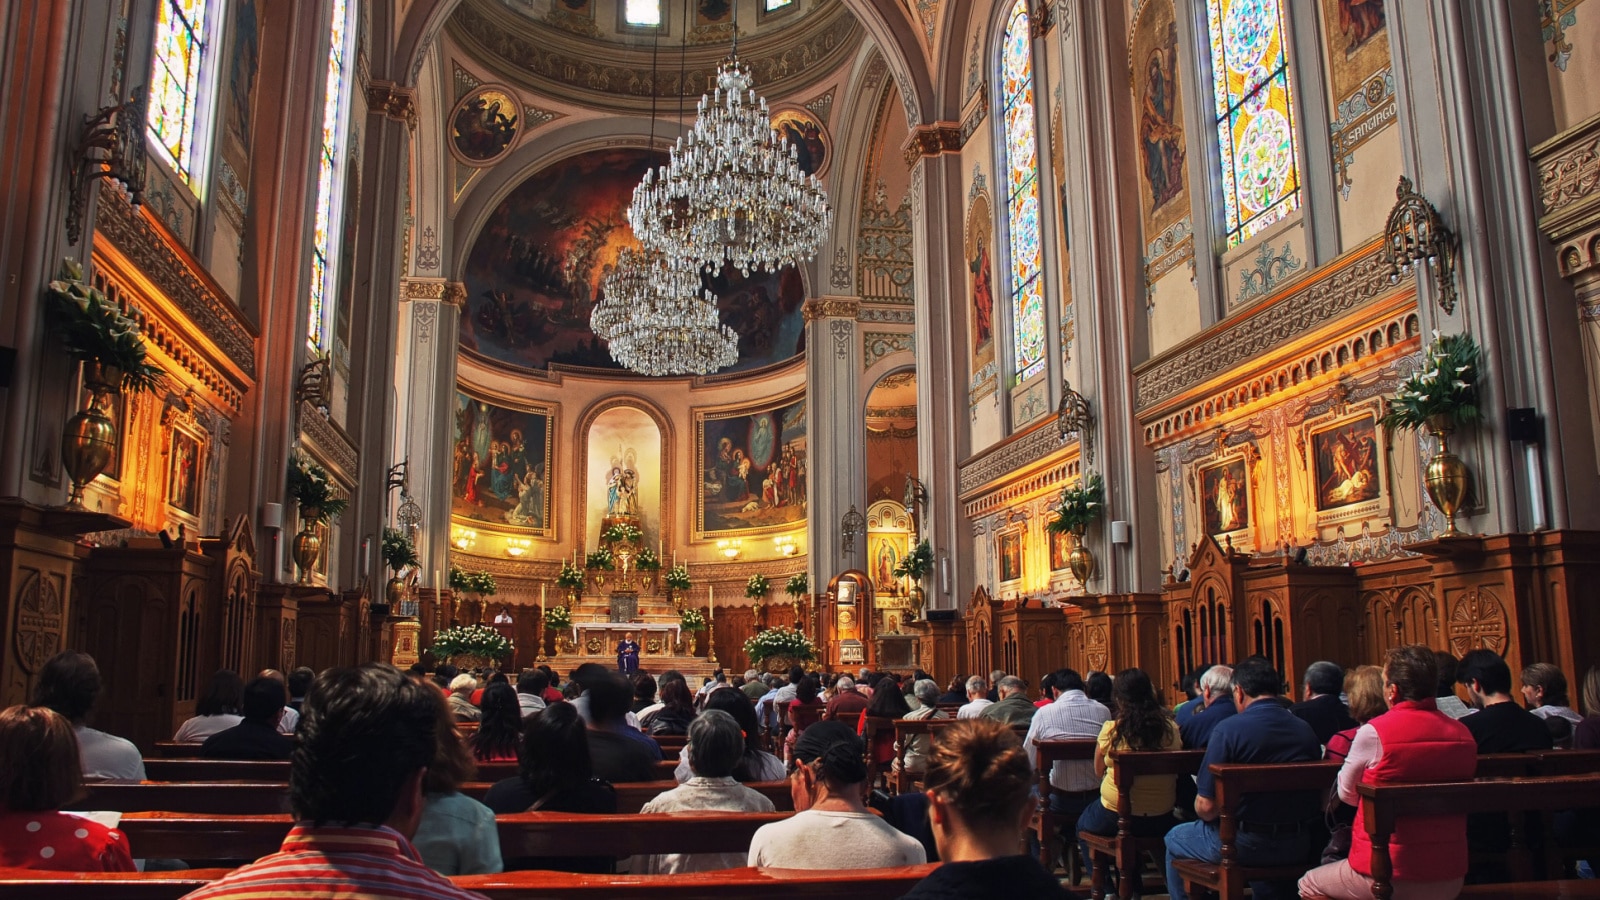 MEXICO CITY - MARCH 14, 2011: Interior of an unidentified church with people during the monday sermon